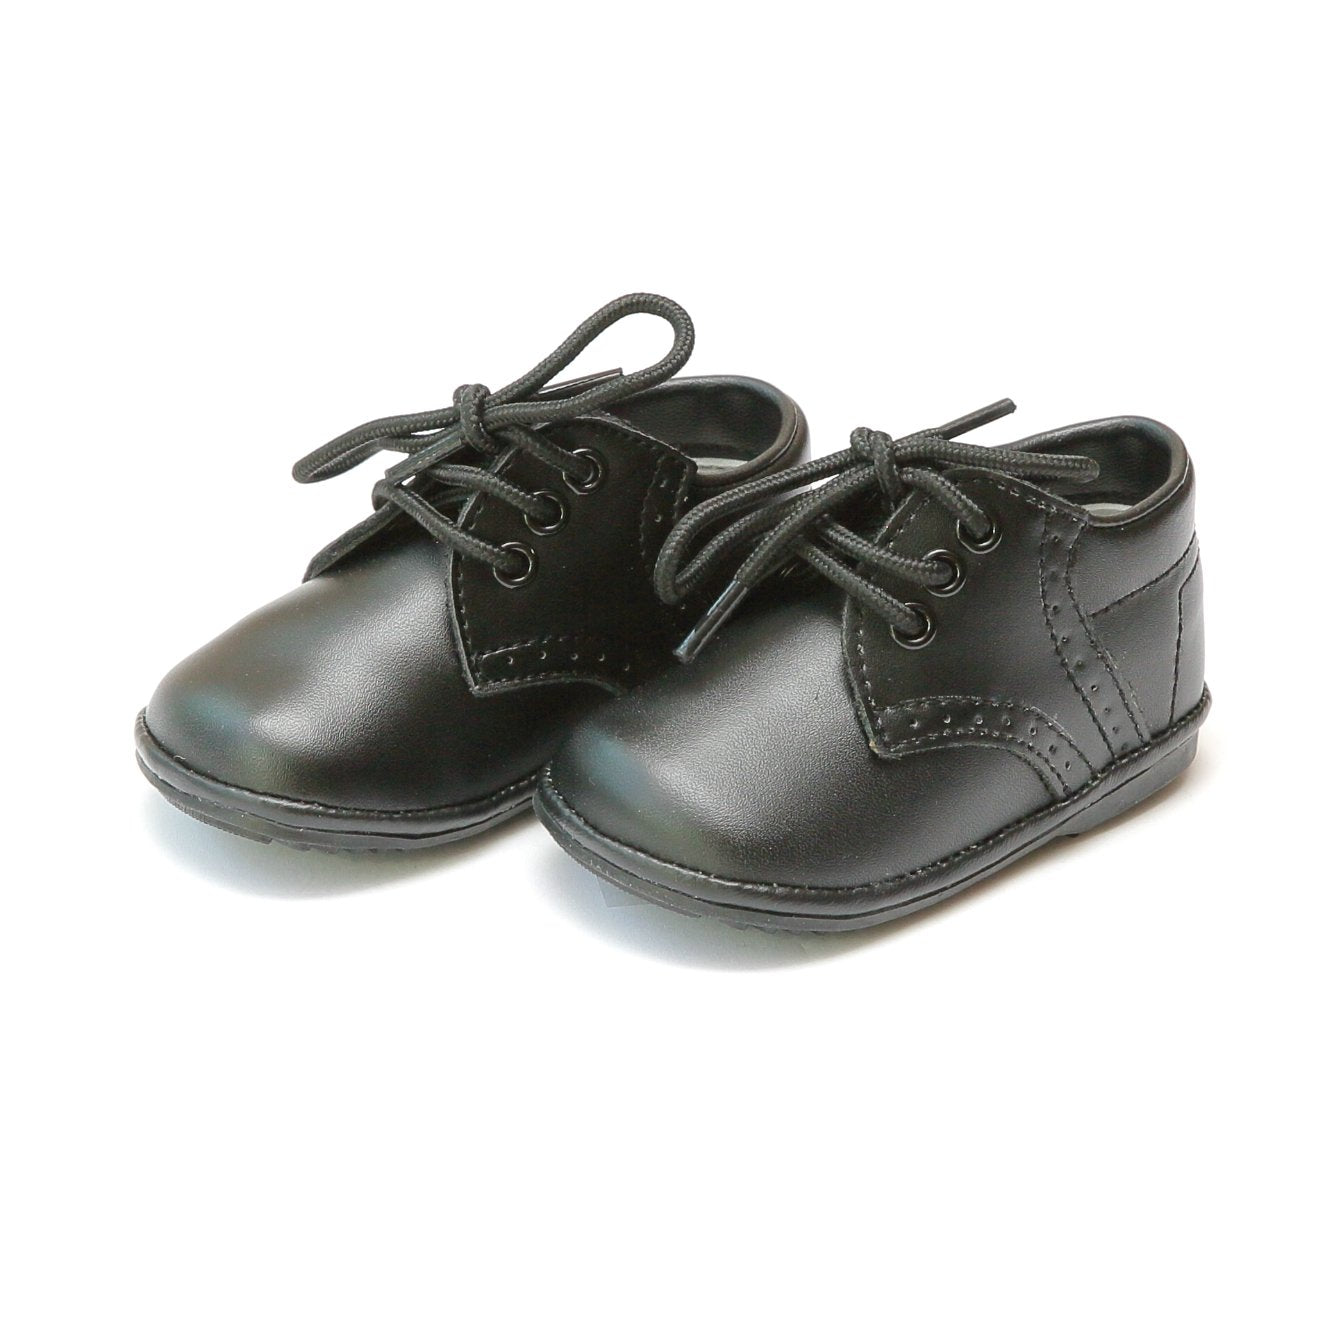 Angel Baby Shoes hi-top oxfords